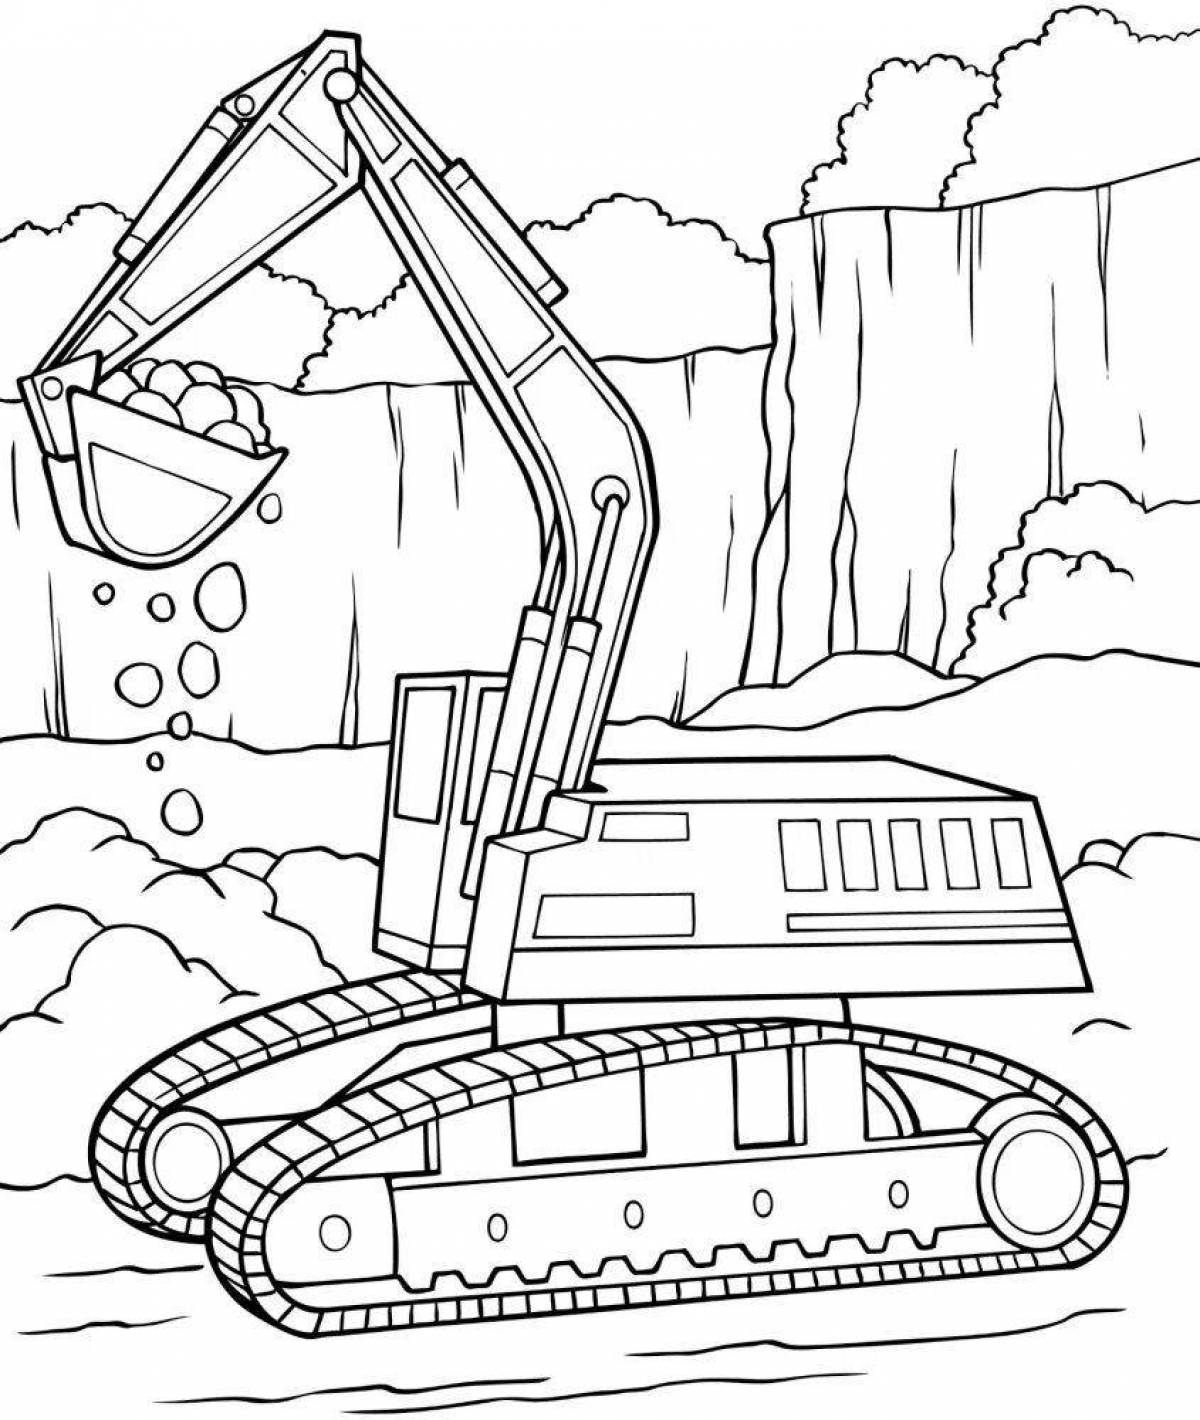 Fun coloring of construction equipment for children